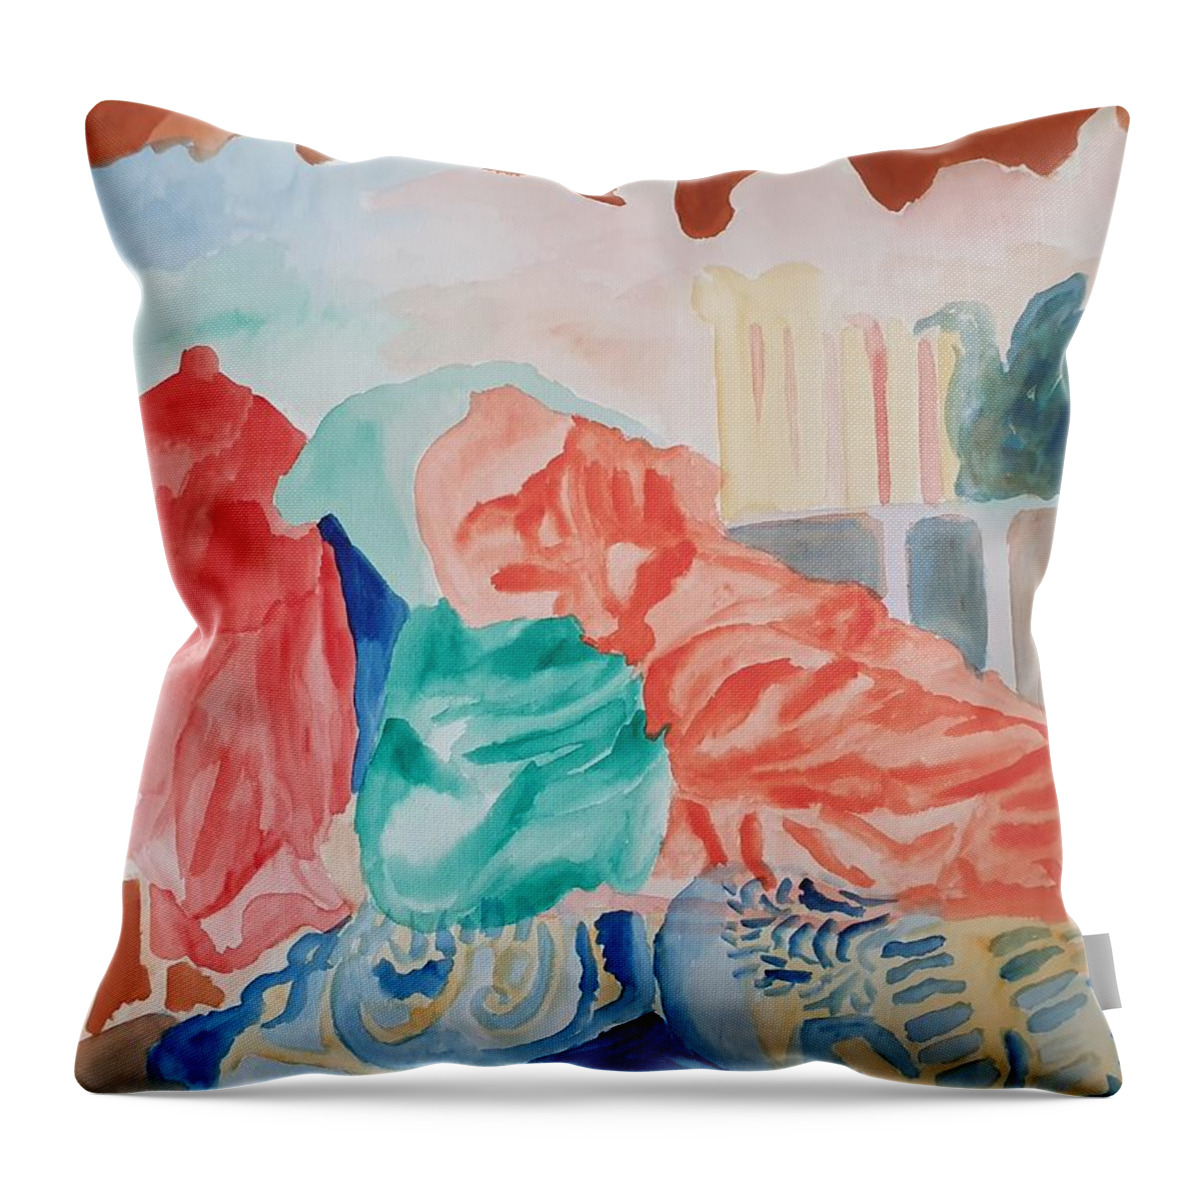 Masterpiece Paintings Throw Pillow featuring the painting Elysium by Enrico Garff